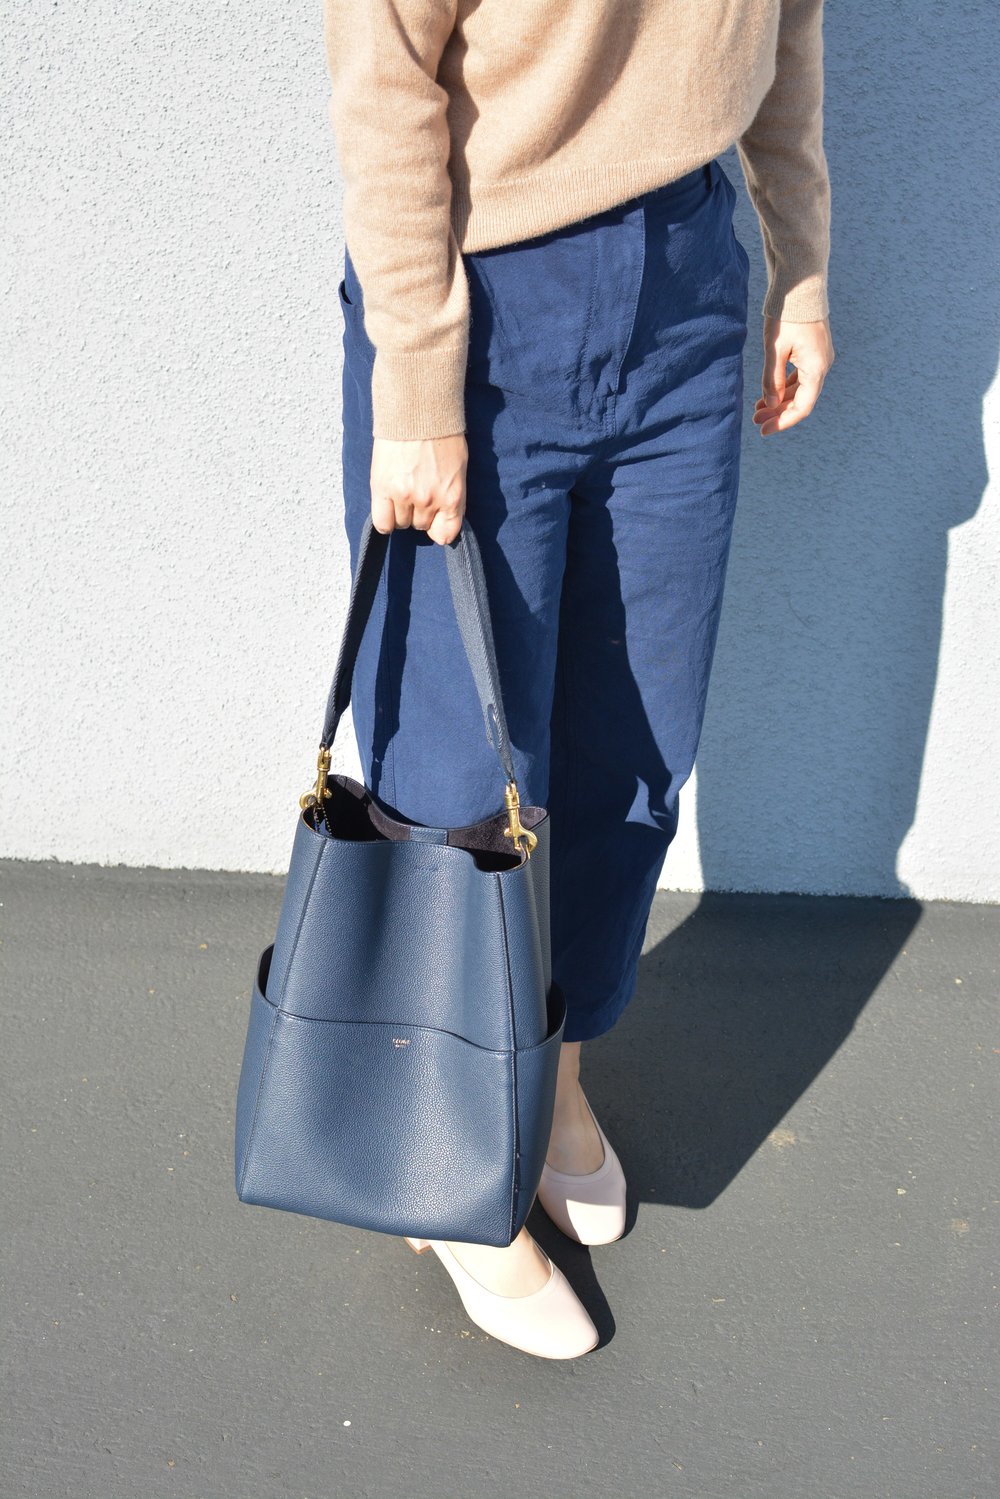 CELINE Seau Sangle Bag Review {Updated} — Temporary-House Wifey